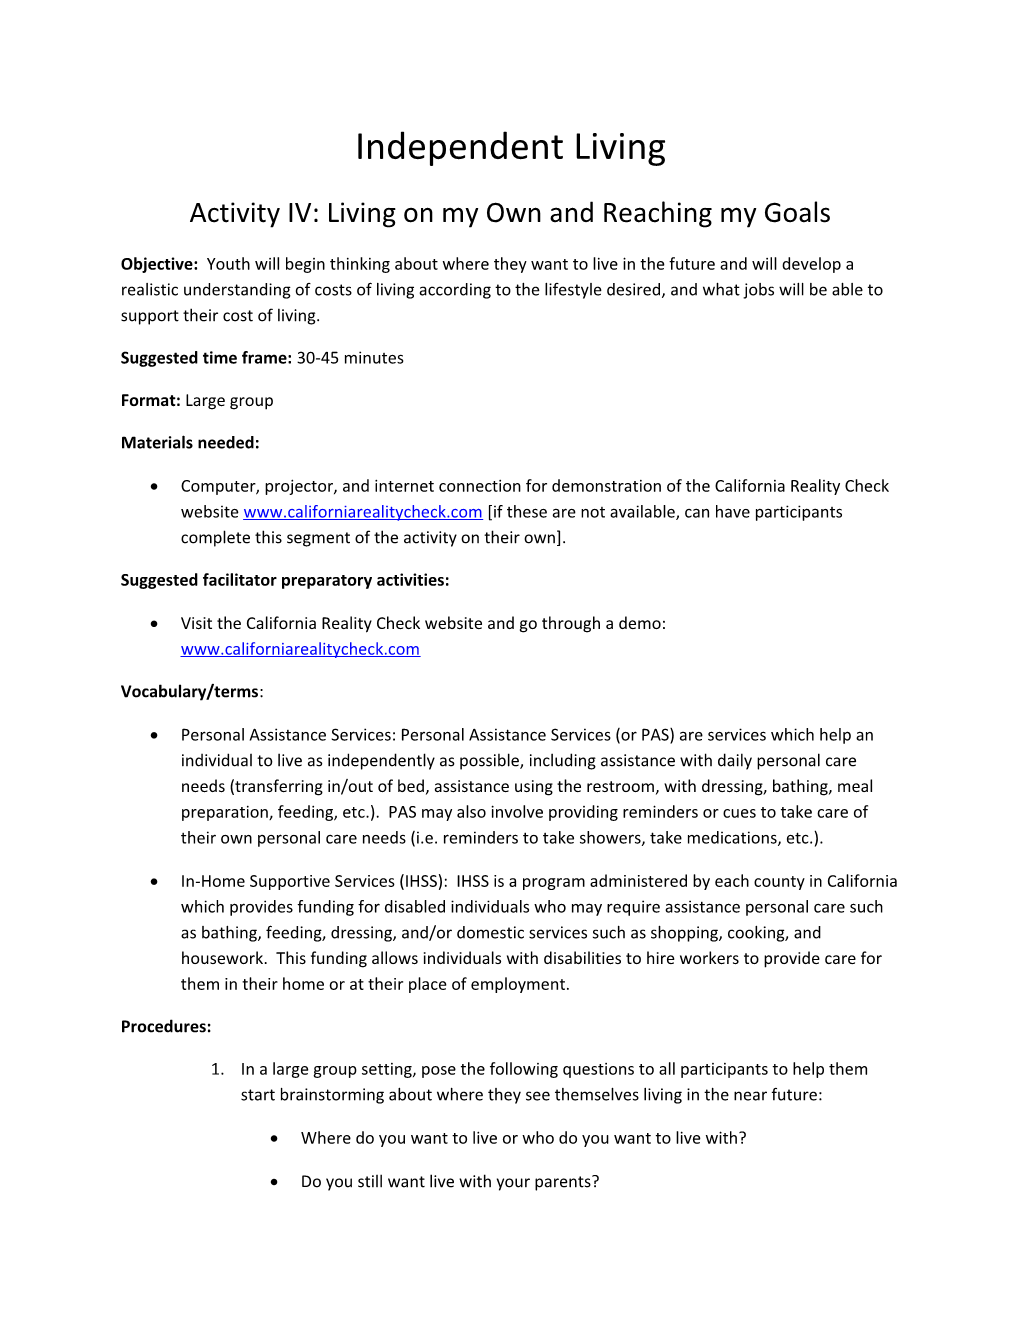 Activity IV: Living on My Own and Reaching My Goals